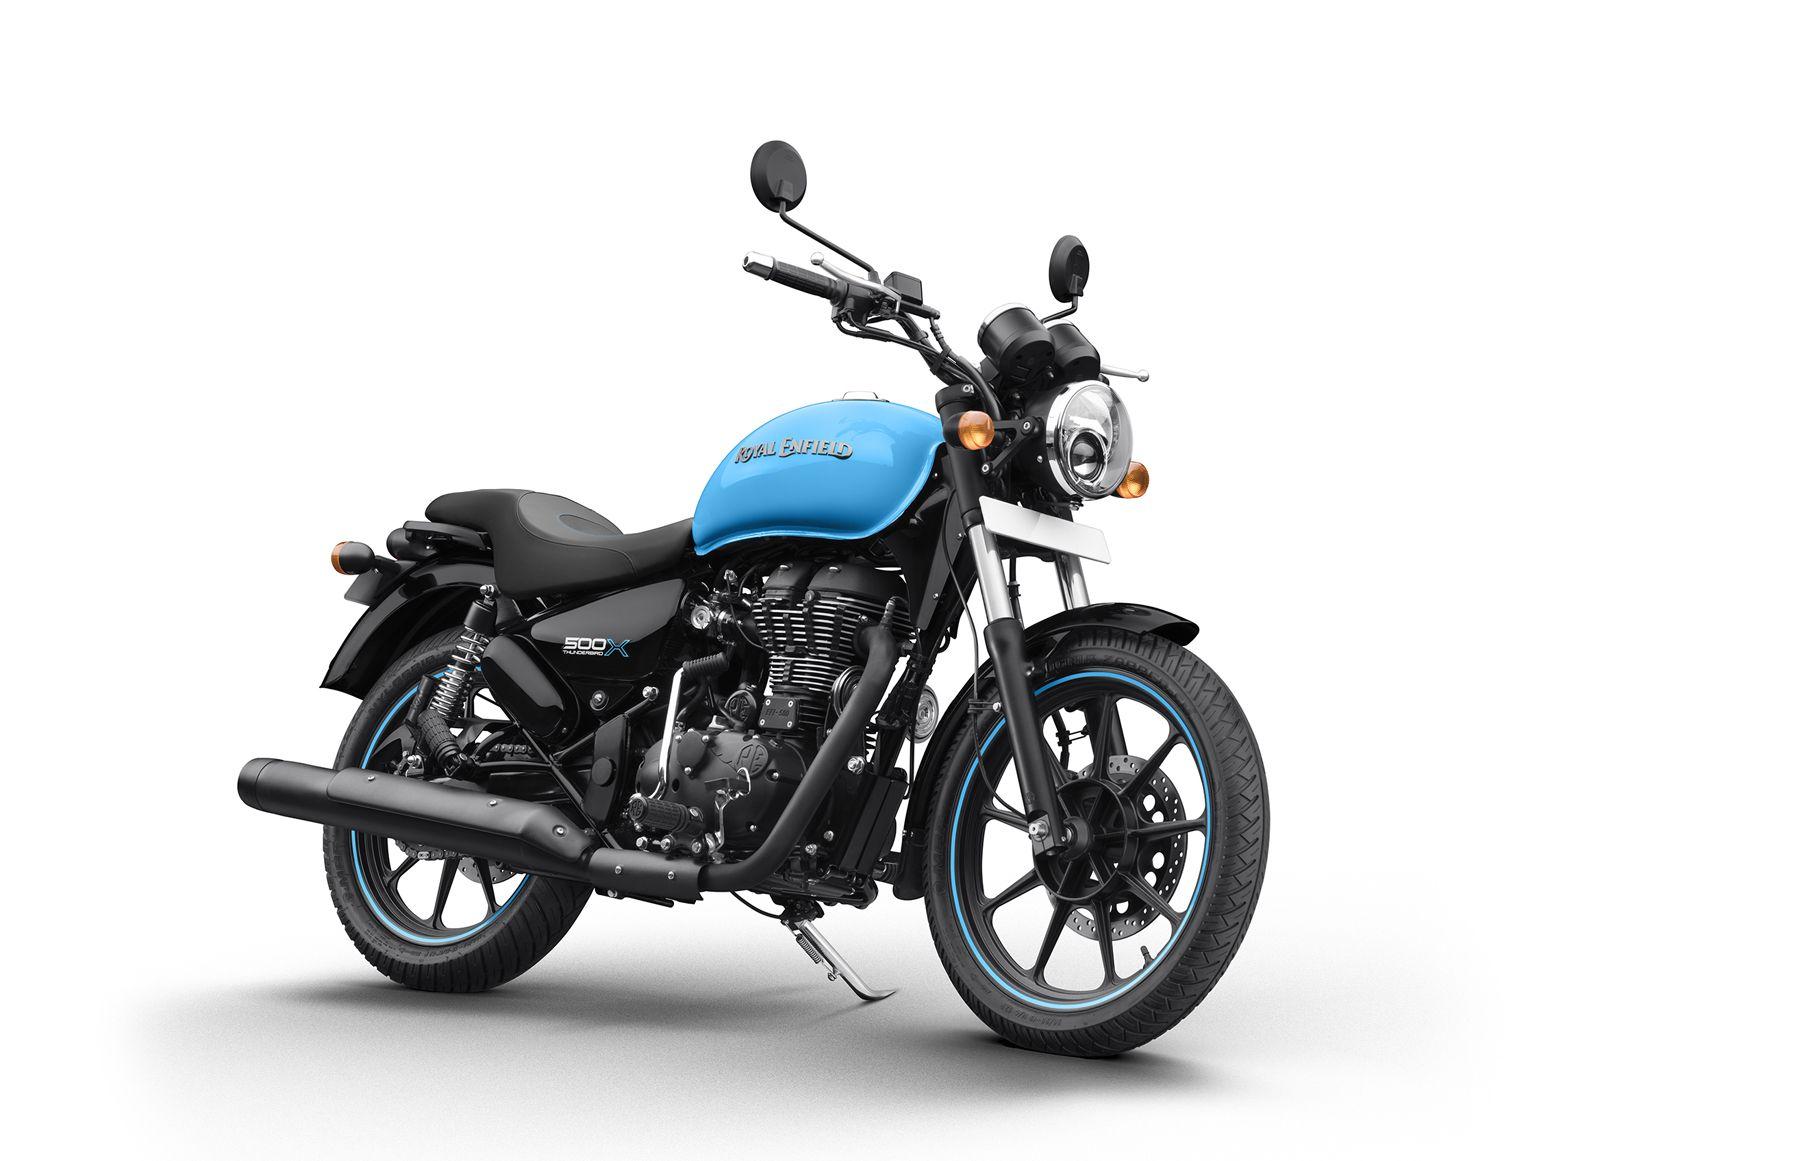 Royal Enfield targets urban adventurers with new Thunderbird X